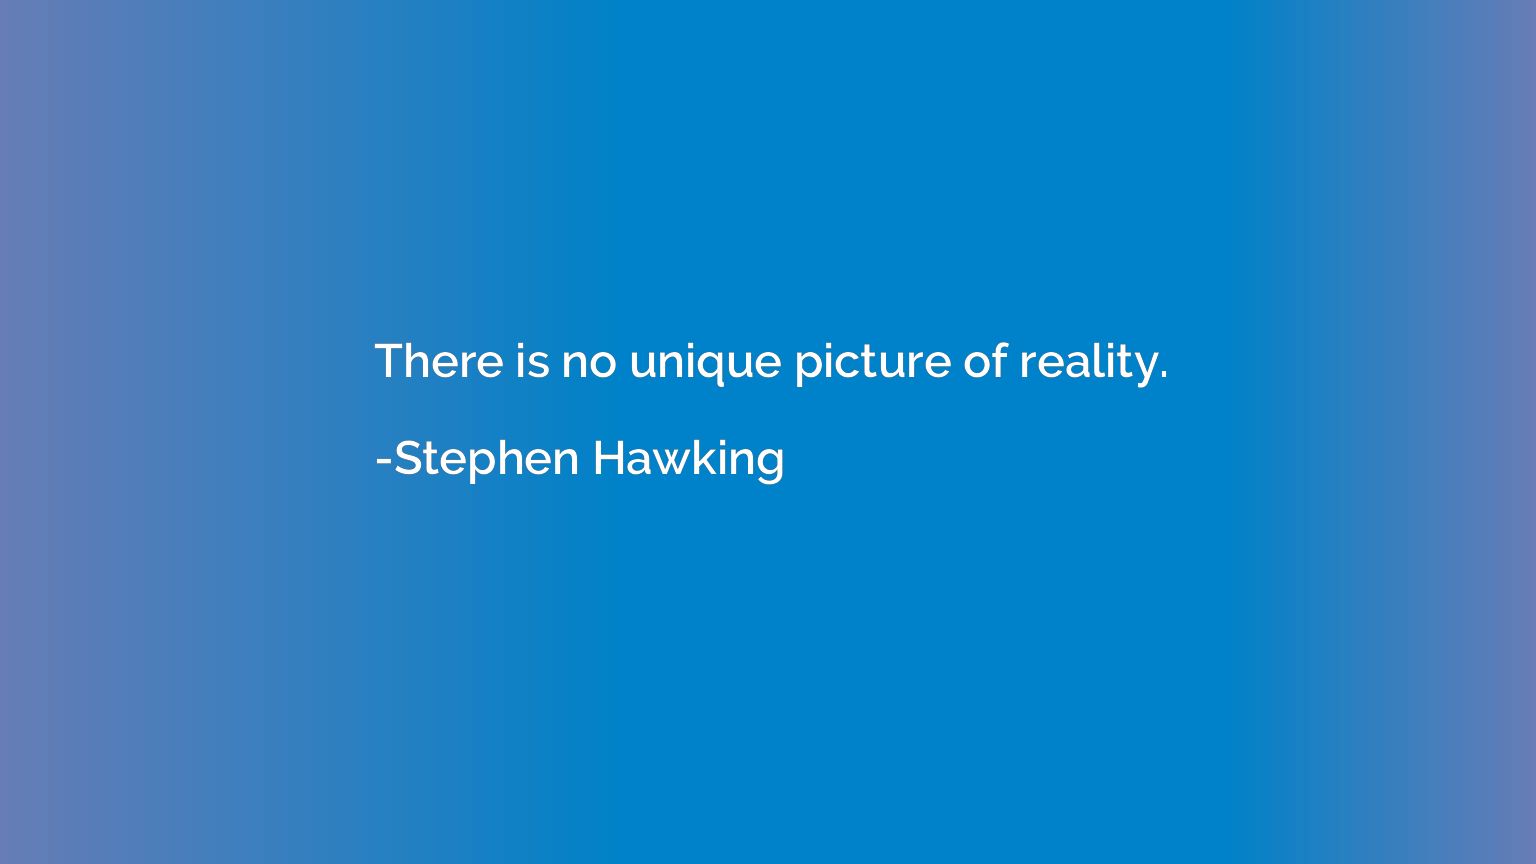 There is no unique picture of reality.